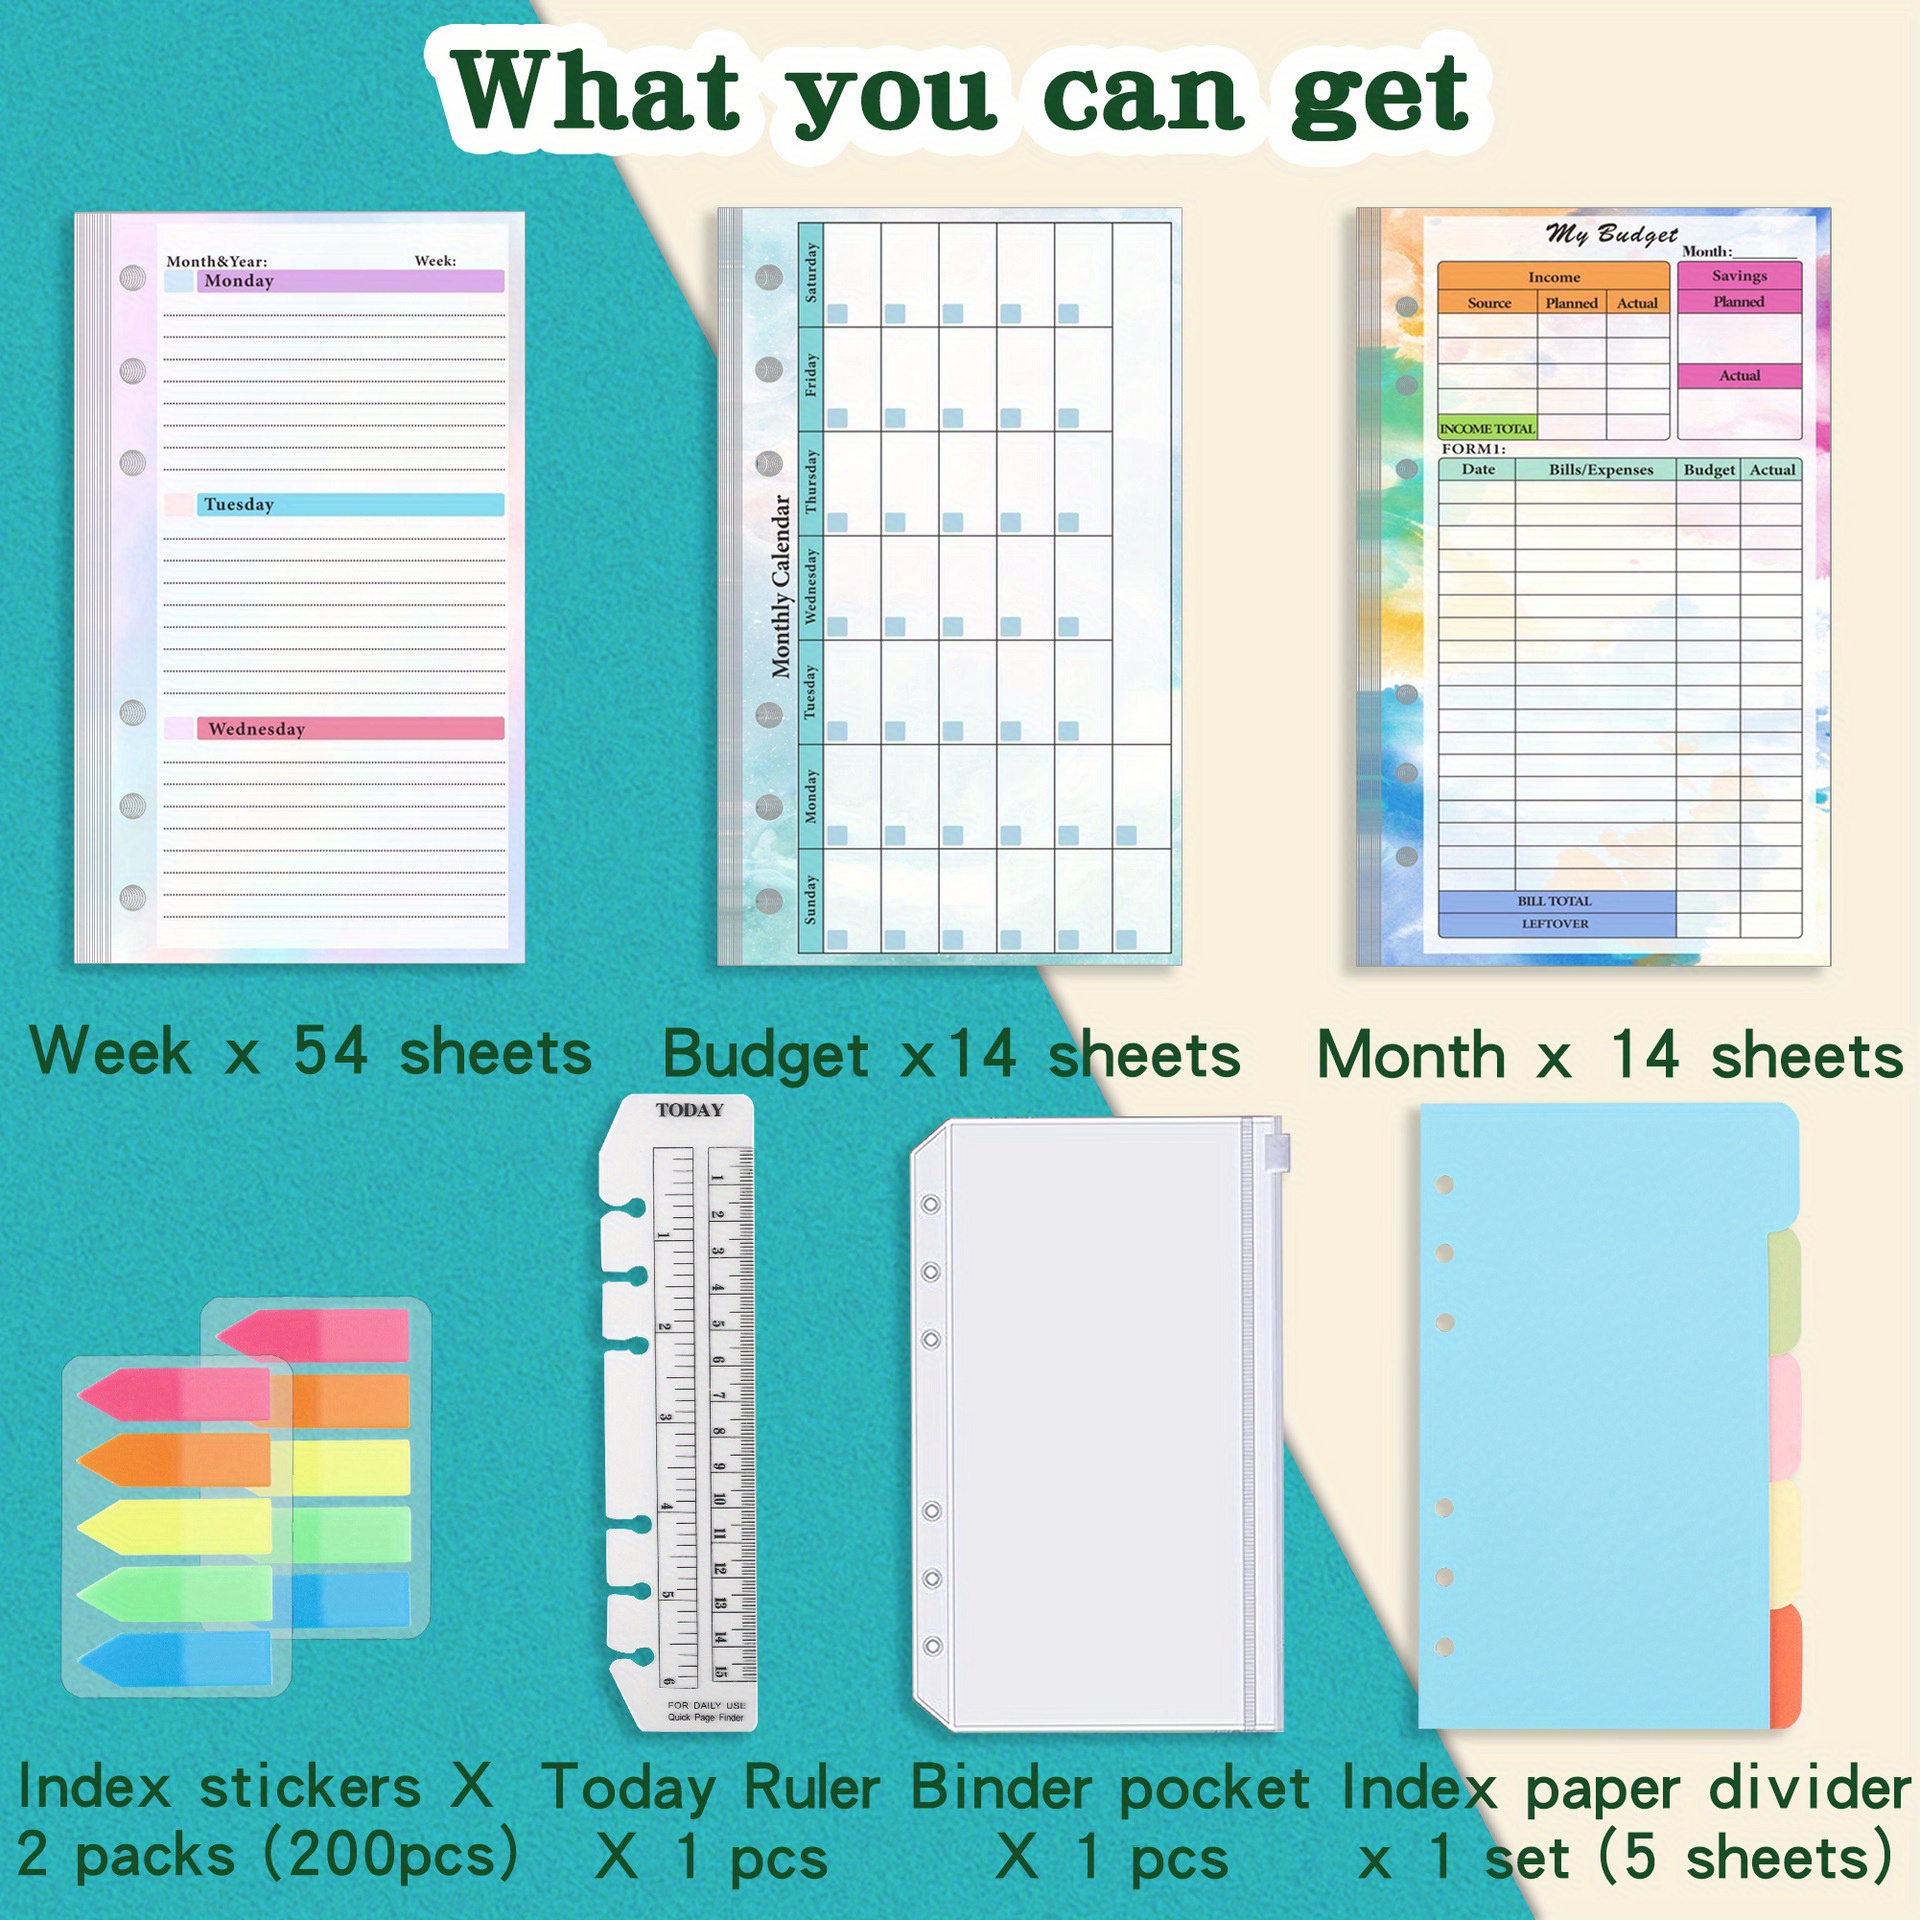 A6 Planner Refill Inserts - Double Sided 6 Ring Binder For